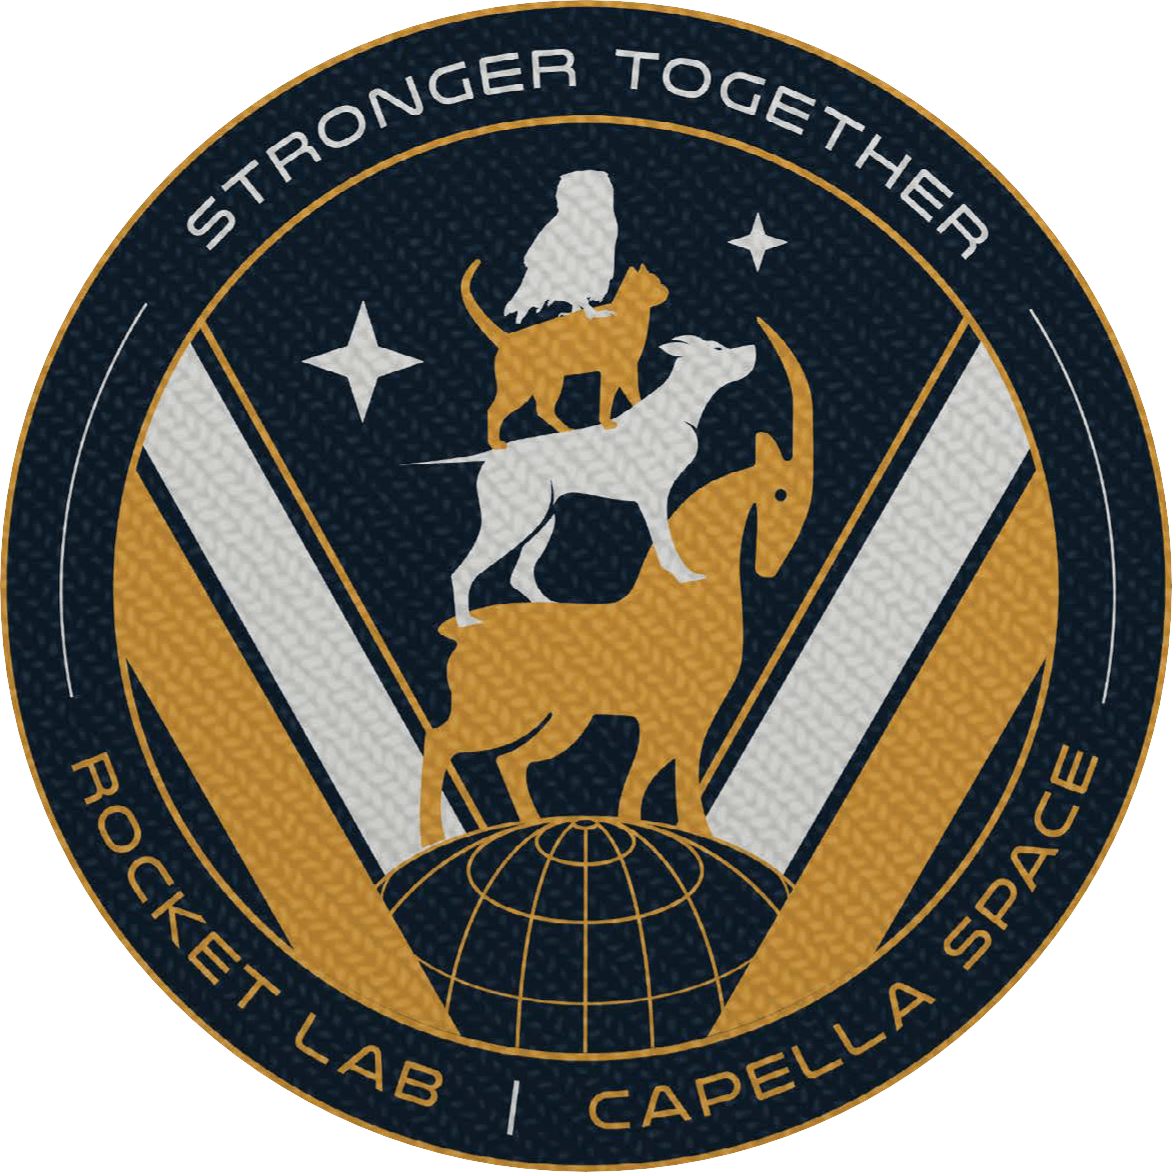 Mission patch for Stronger Together